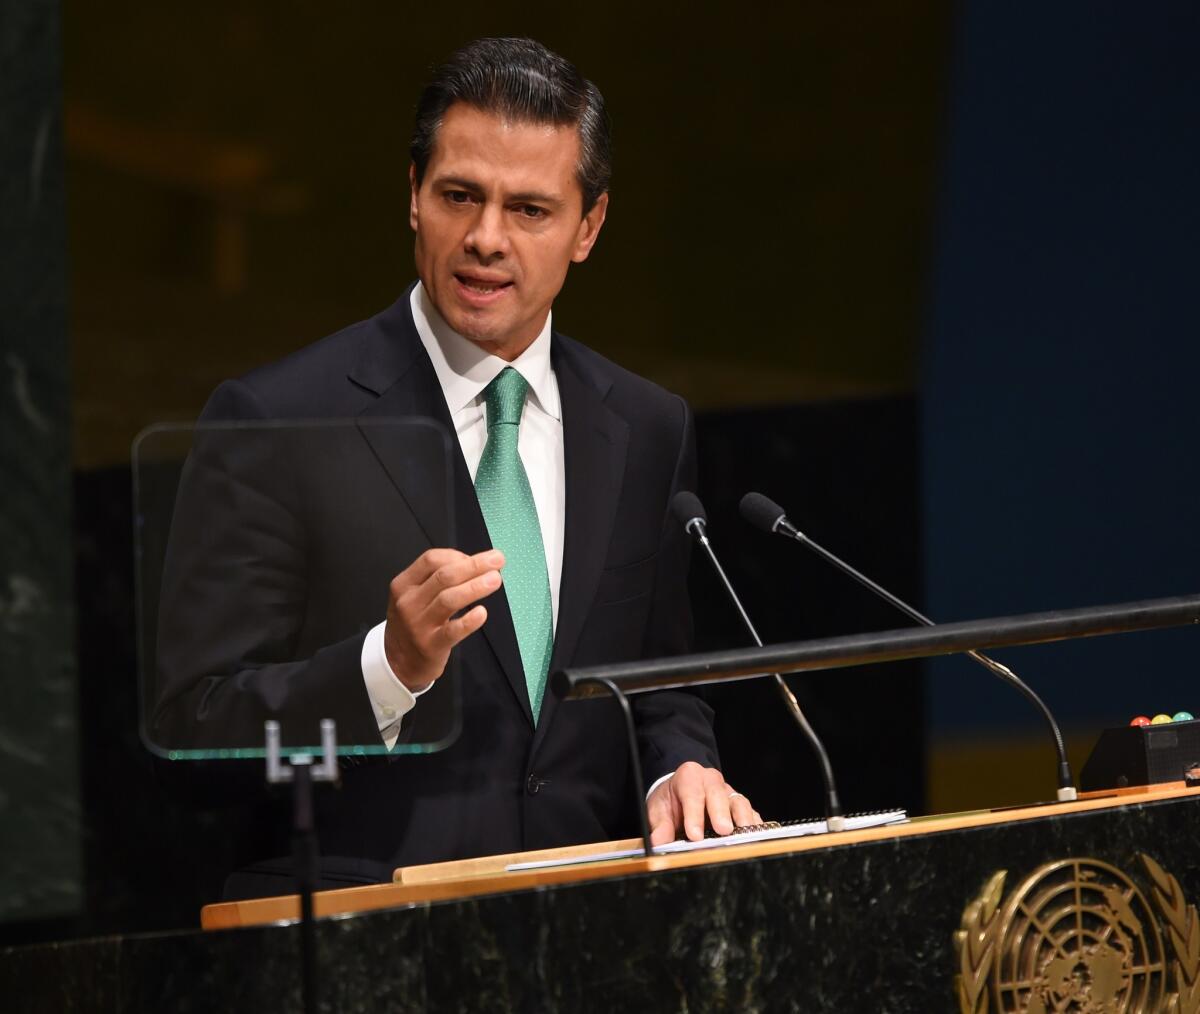 Mexican President Enrique Peña Nieto addresses the United Nations General Assembly on Wednesday at the United Nations in New York.